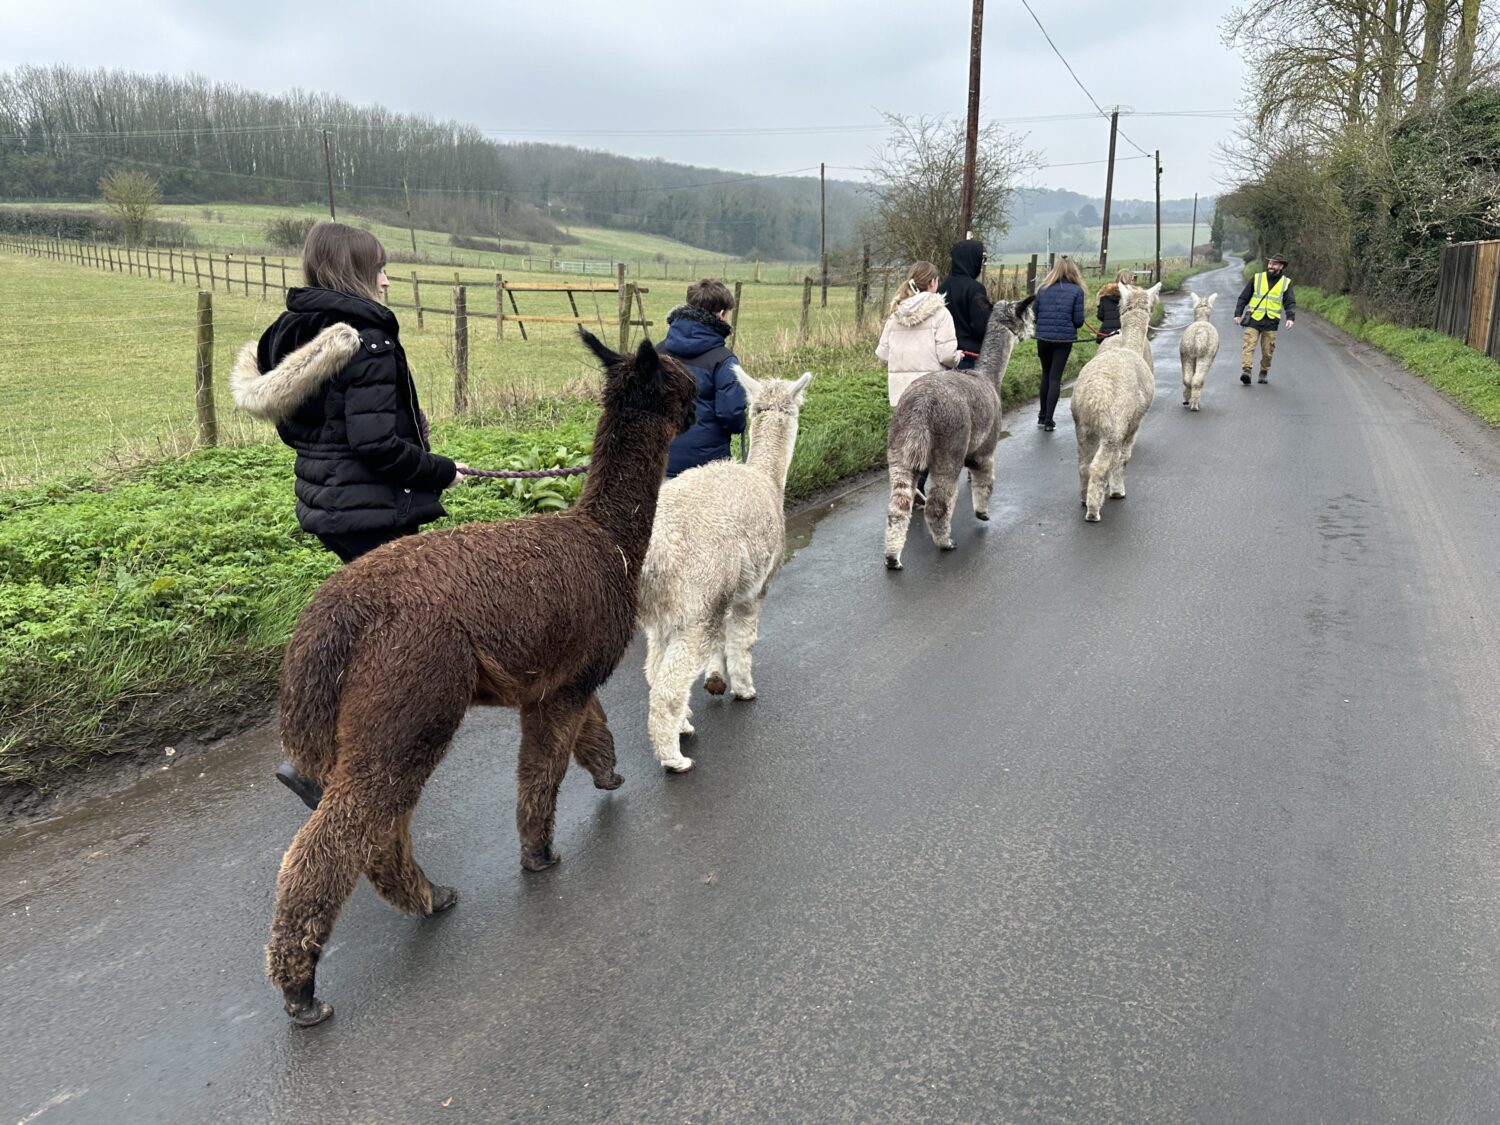 Students walking with Alpacas down a road